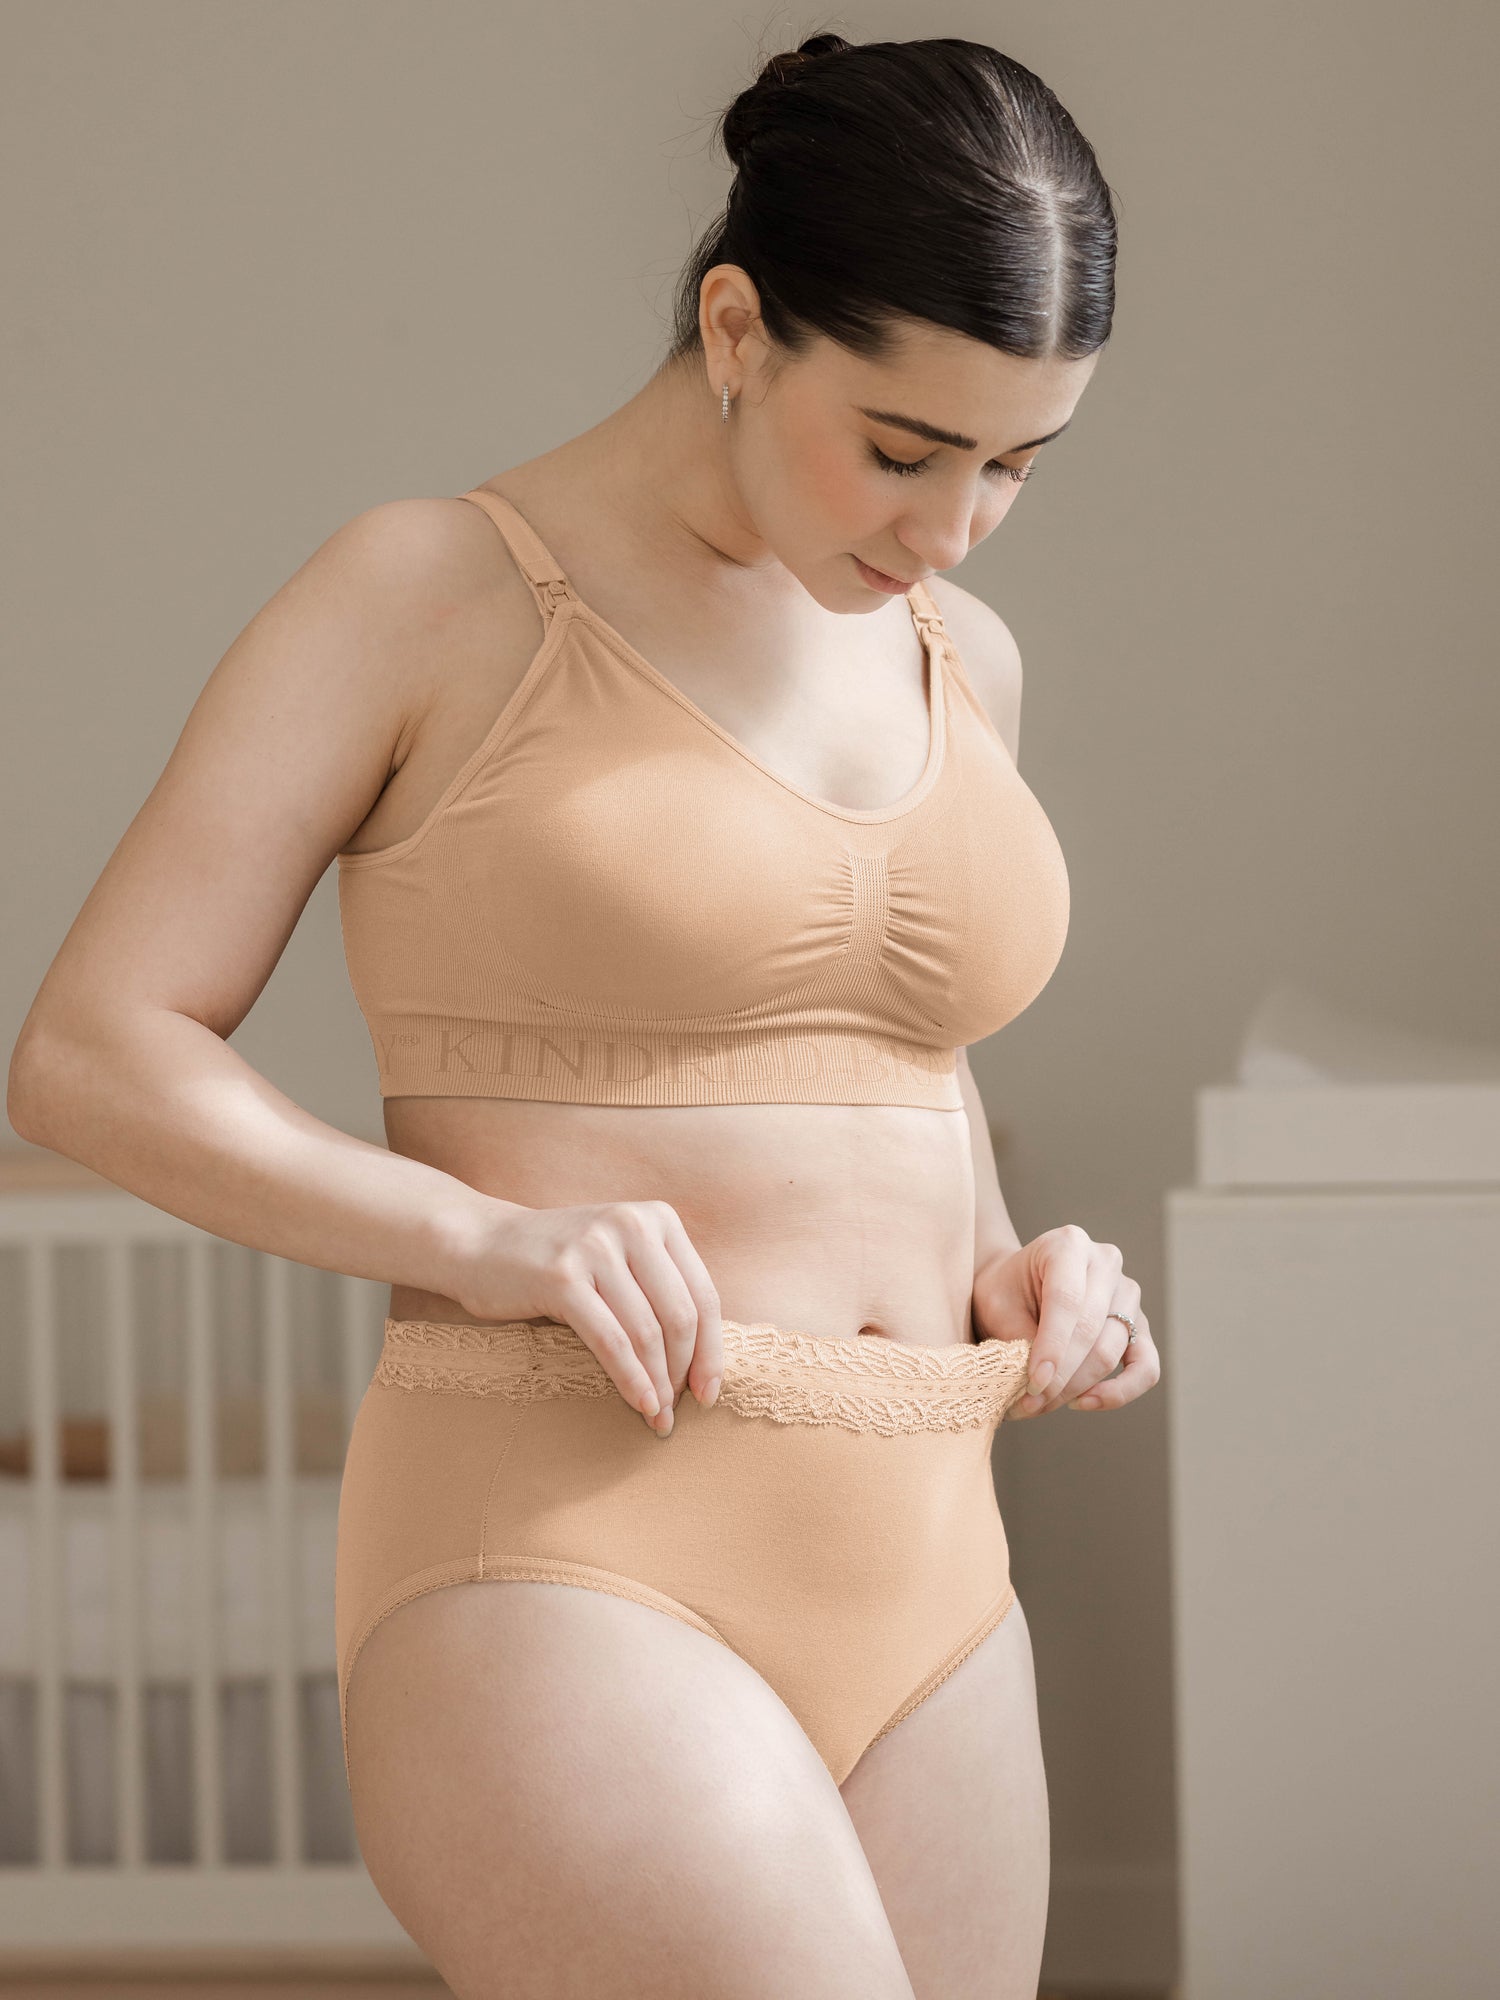 You Will Want to Stock Up On This Postpartum Mesh Underwear